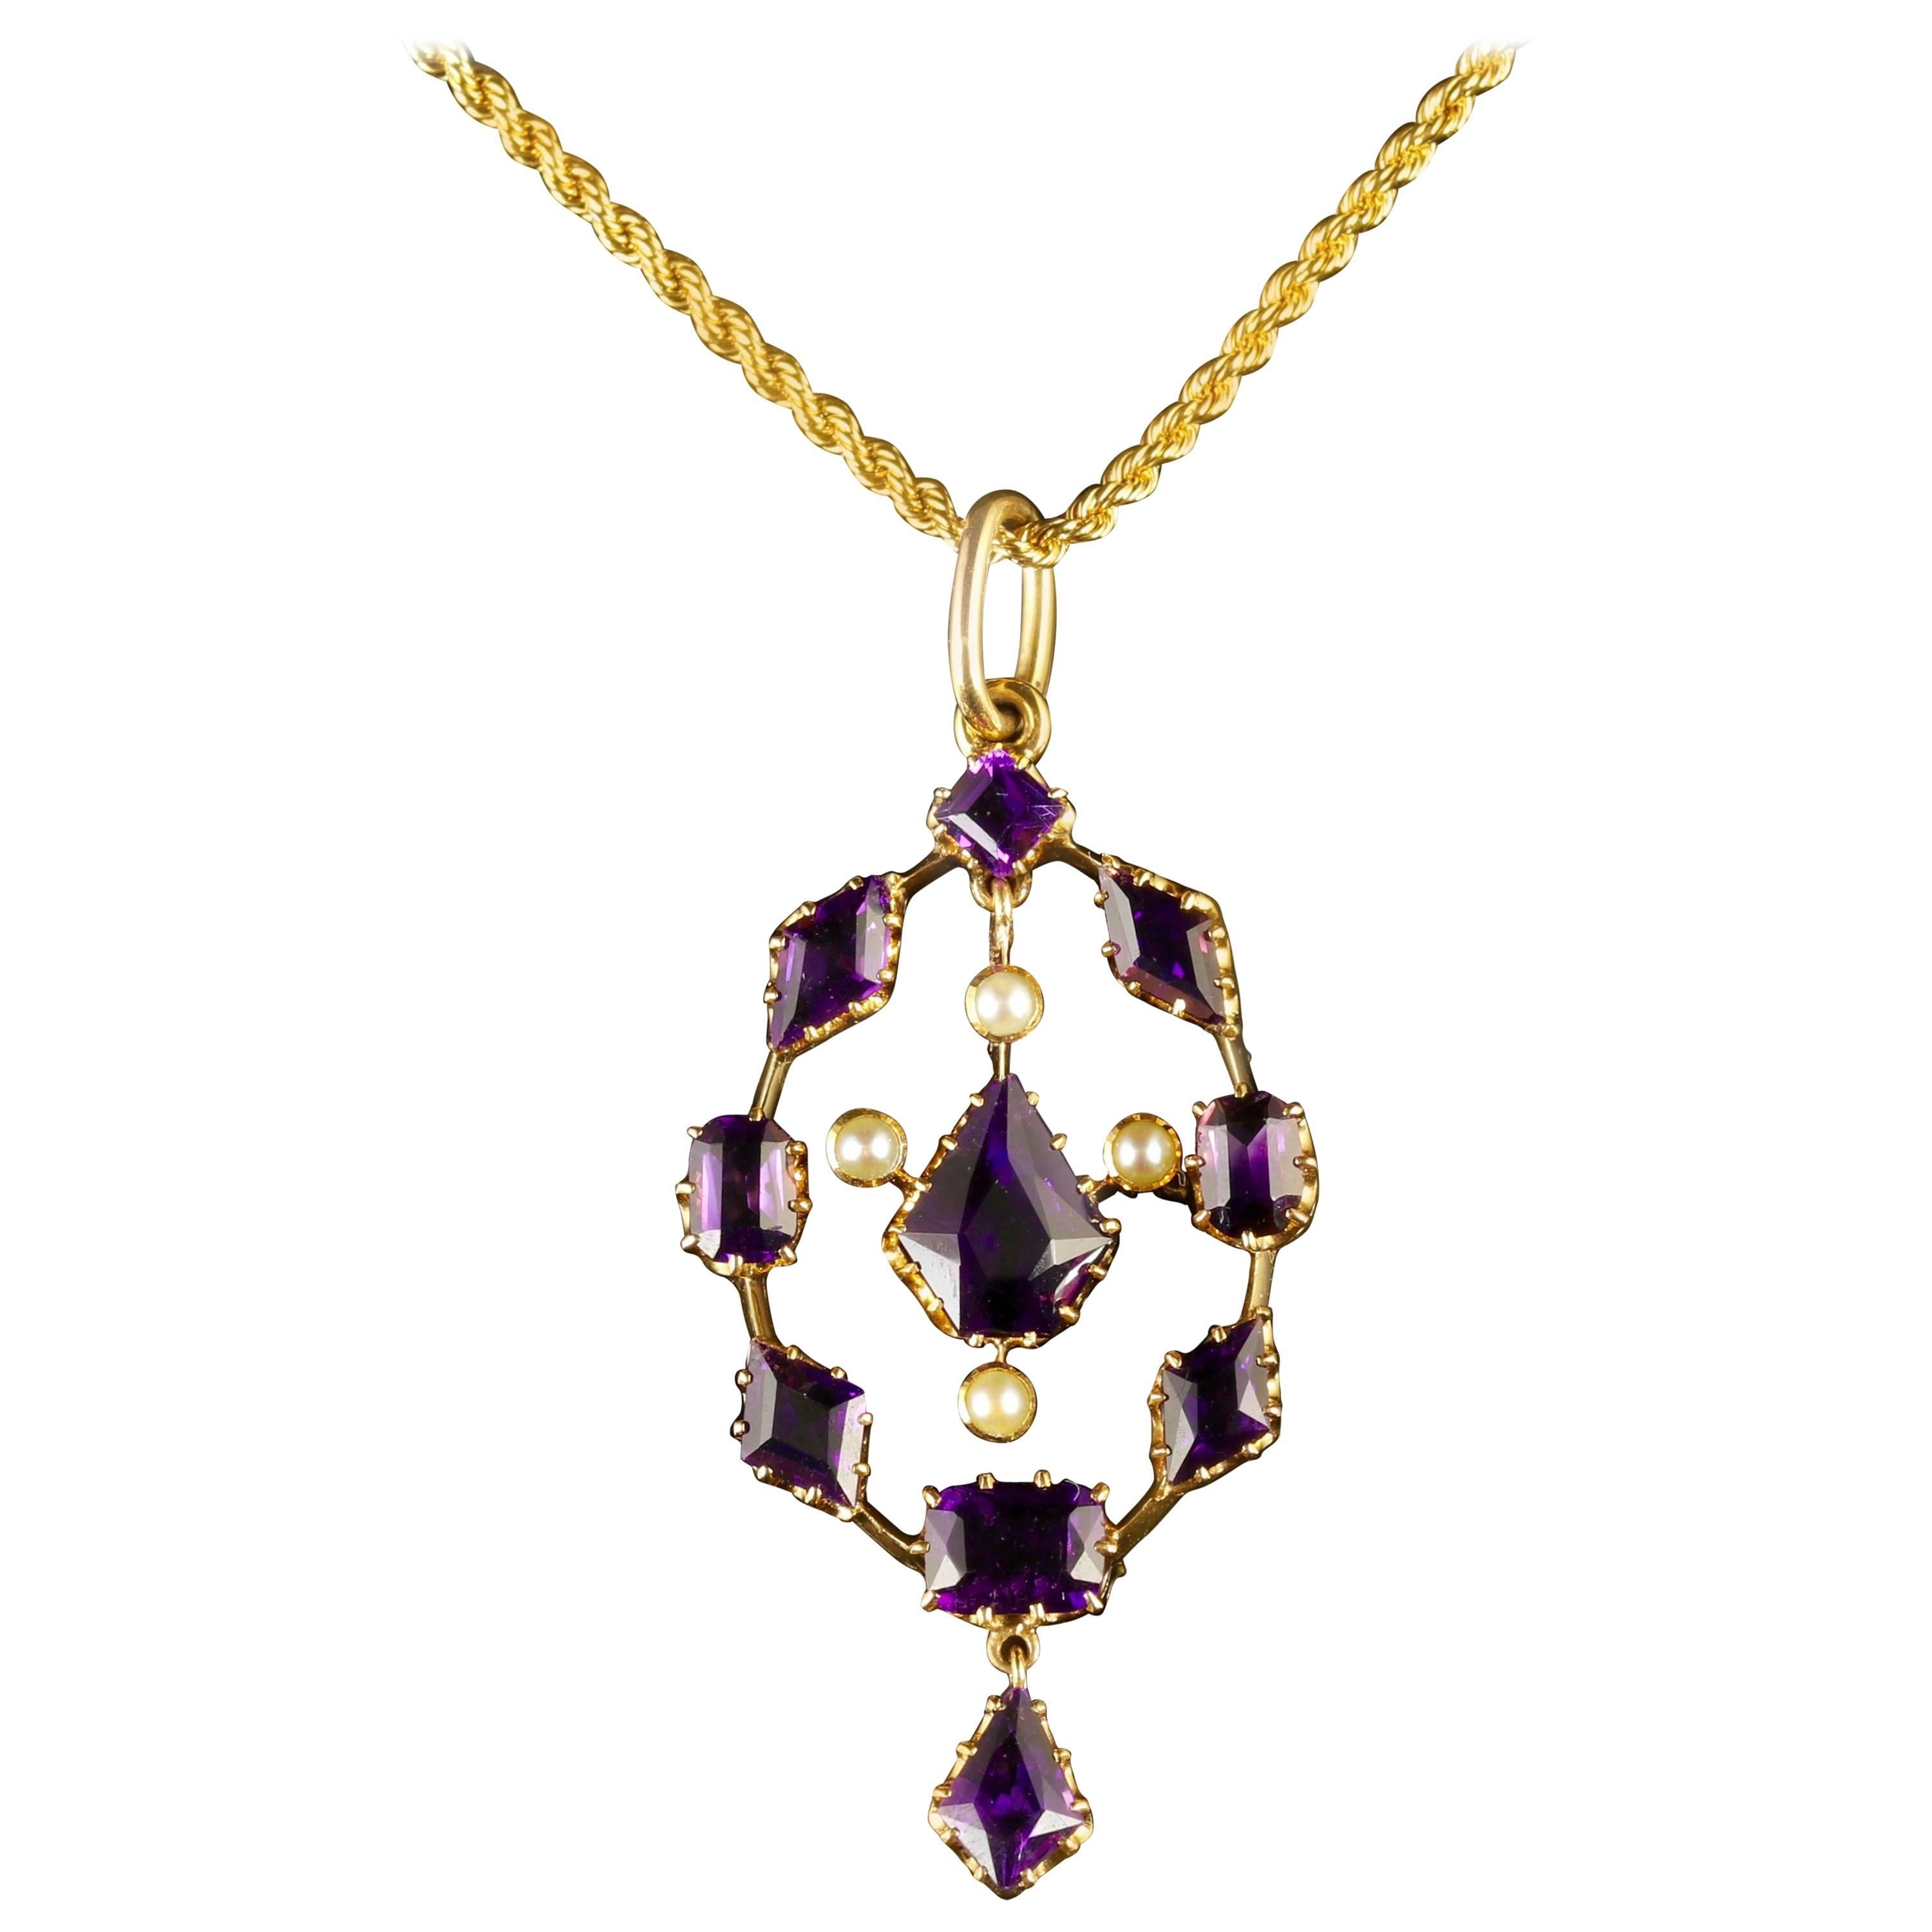 Antique Victorian Amethyst Pendant and Necklace 15 Carat Gold